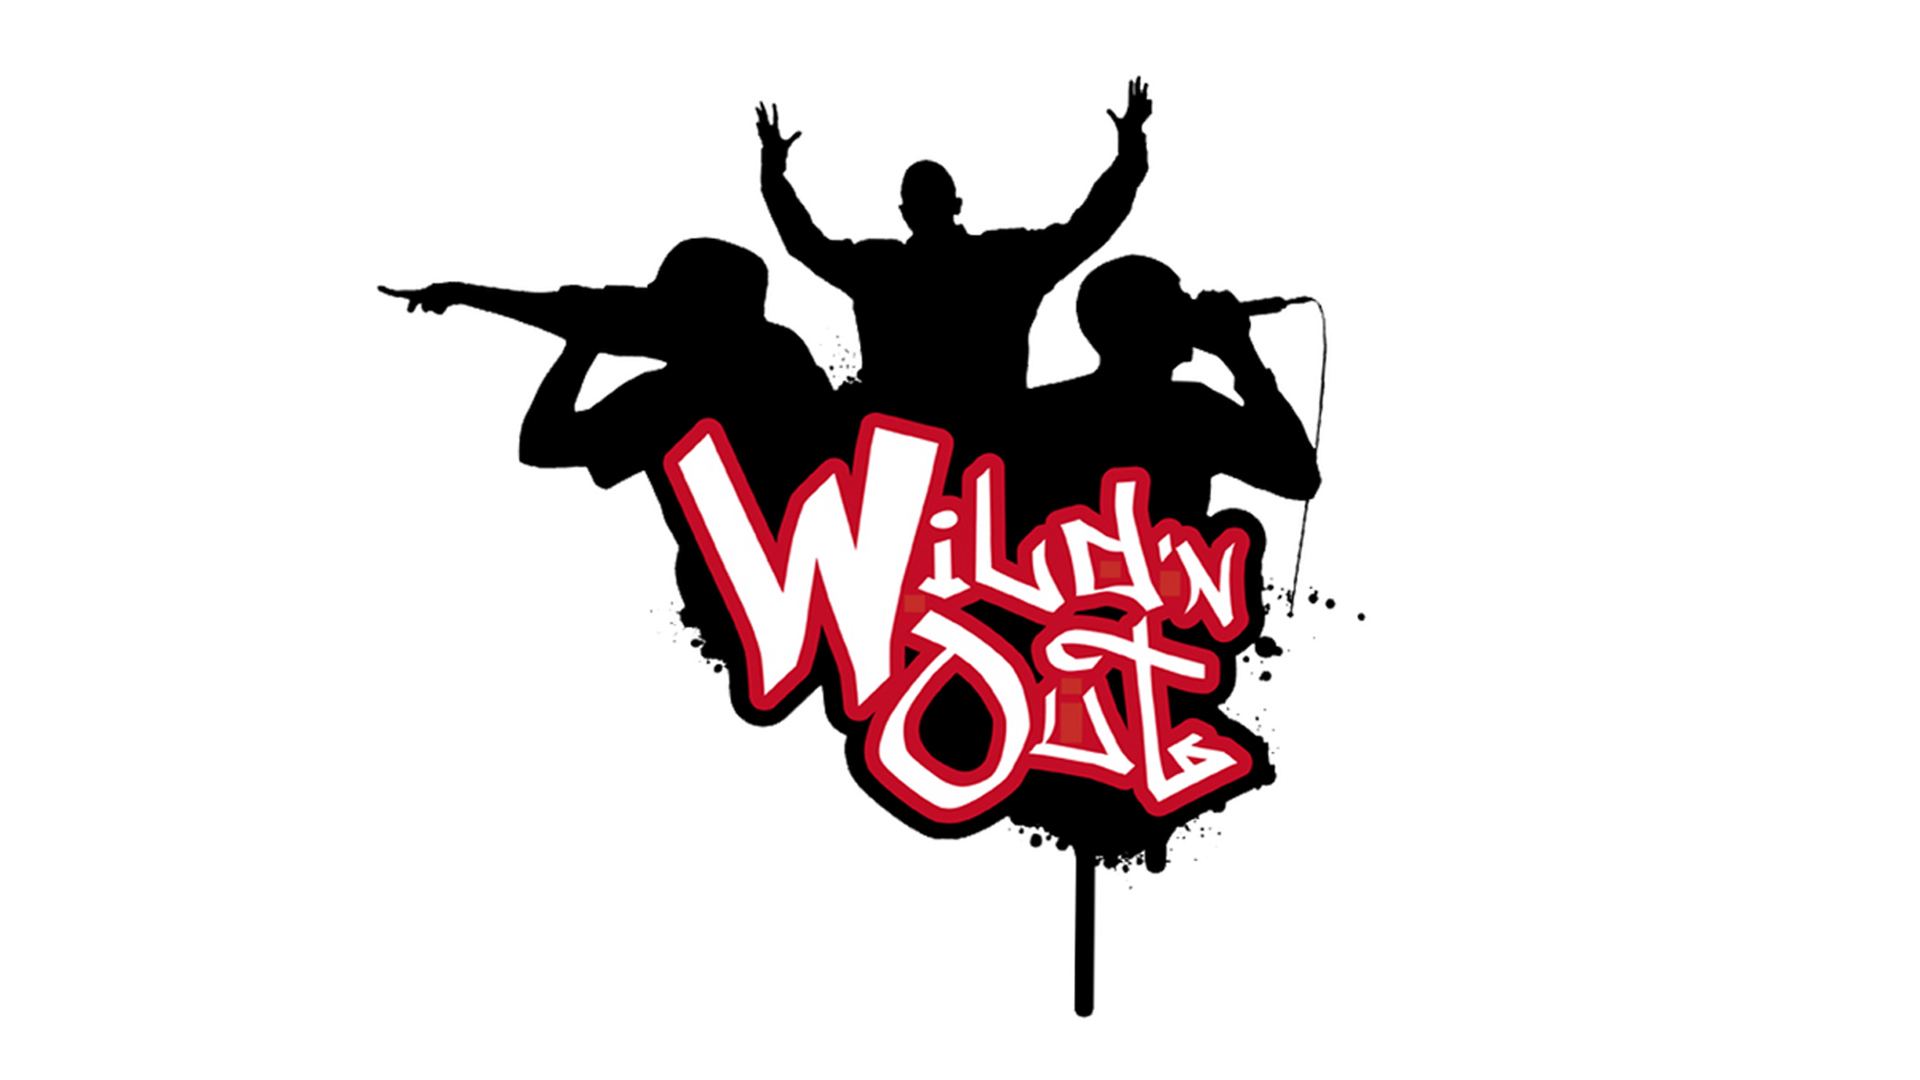 Nick Cannon Presents Wild 'N Out (TV Series 2005 Now)